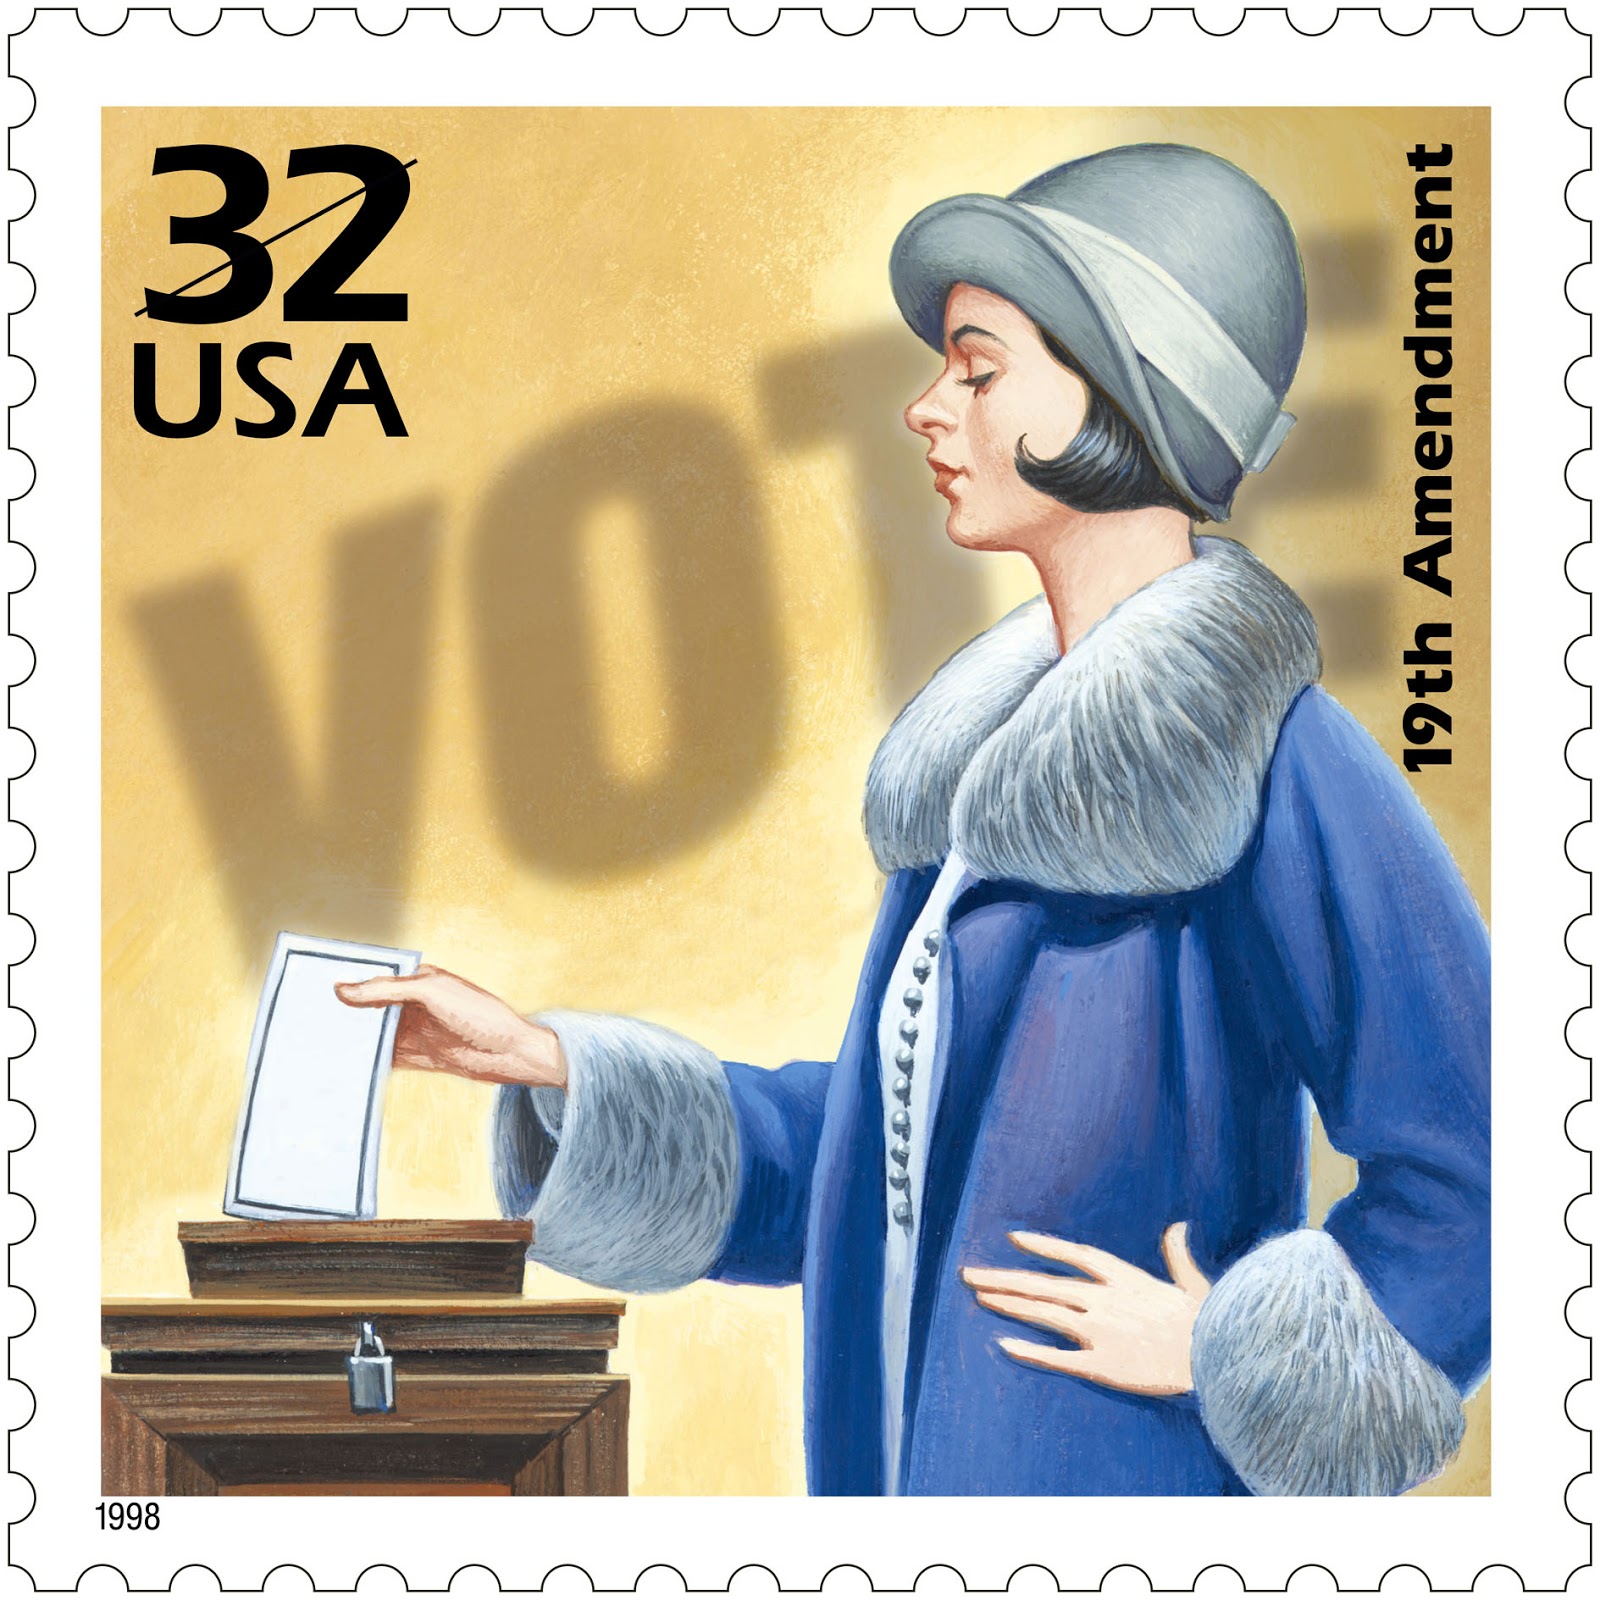 US Citizenship Podcast: Happy Women's Suffrage Day!